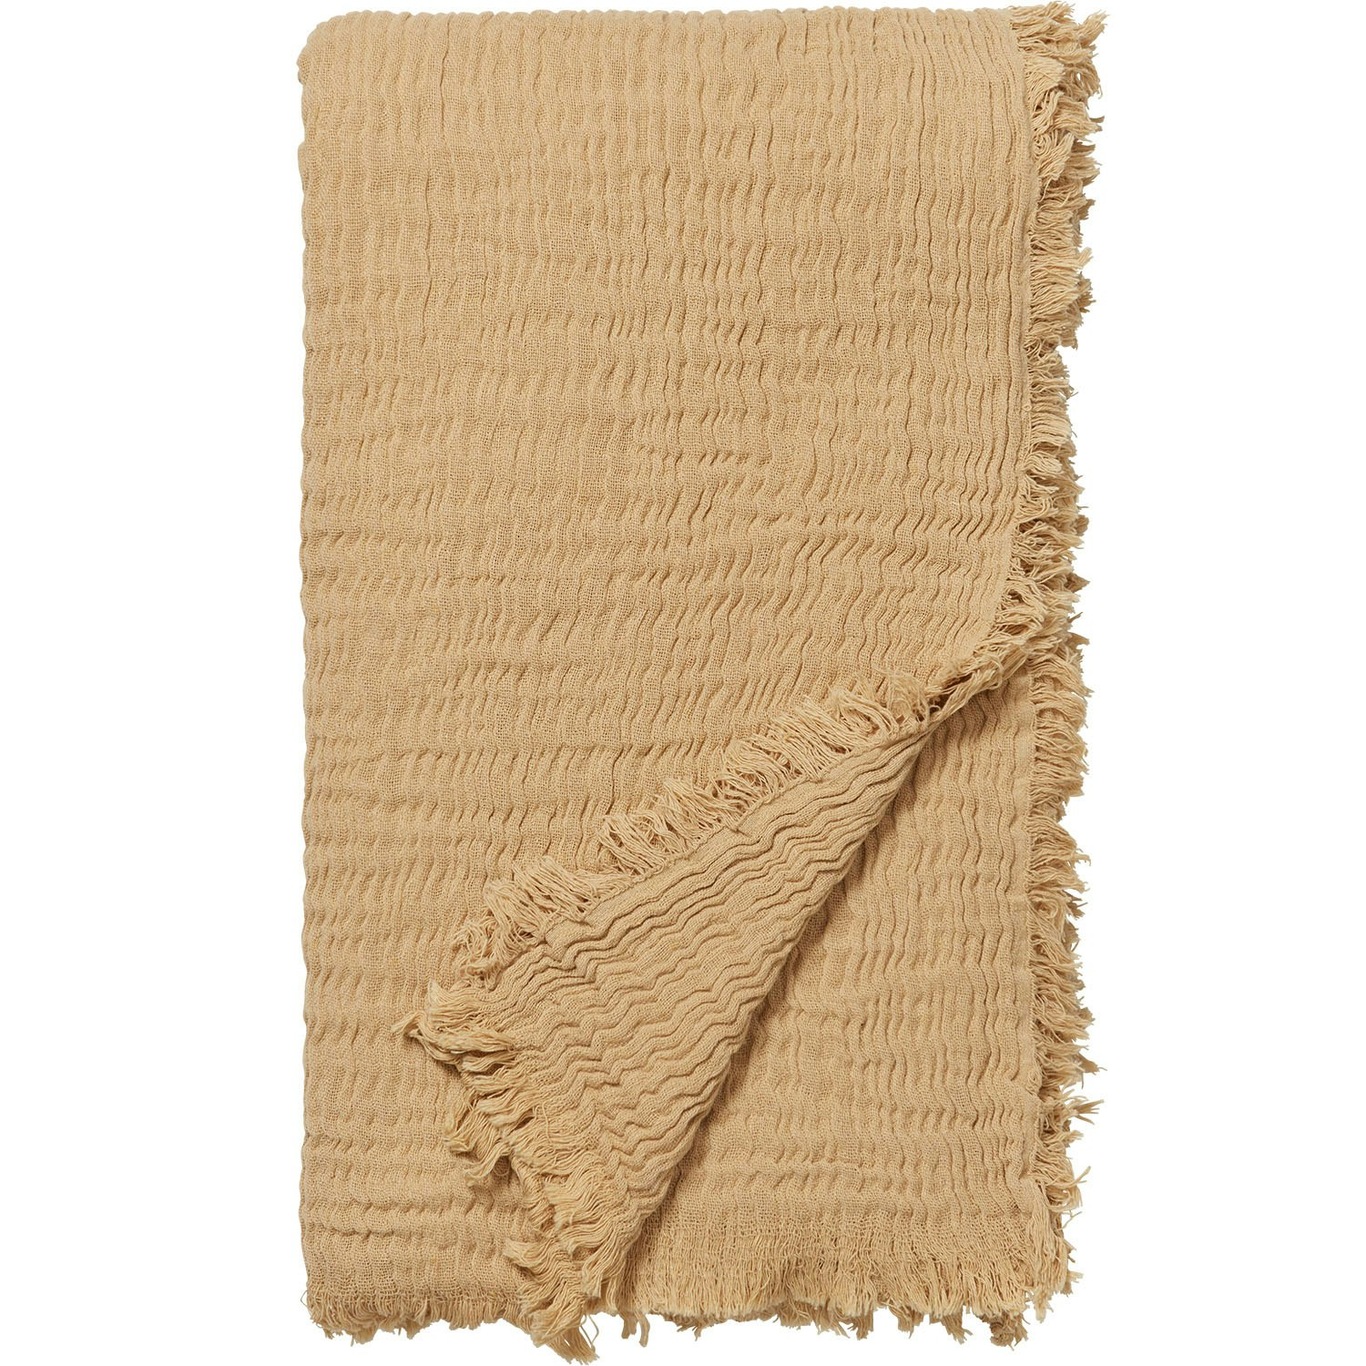 Reloved Tagesdecke Sand, 240x260 cm